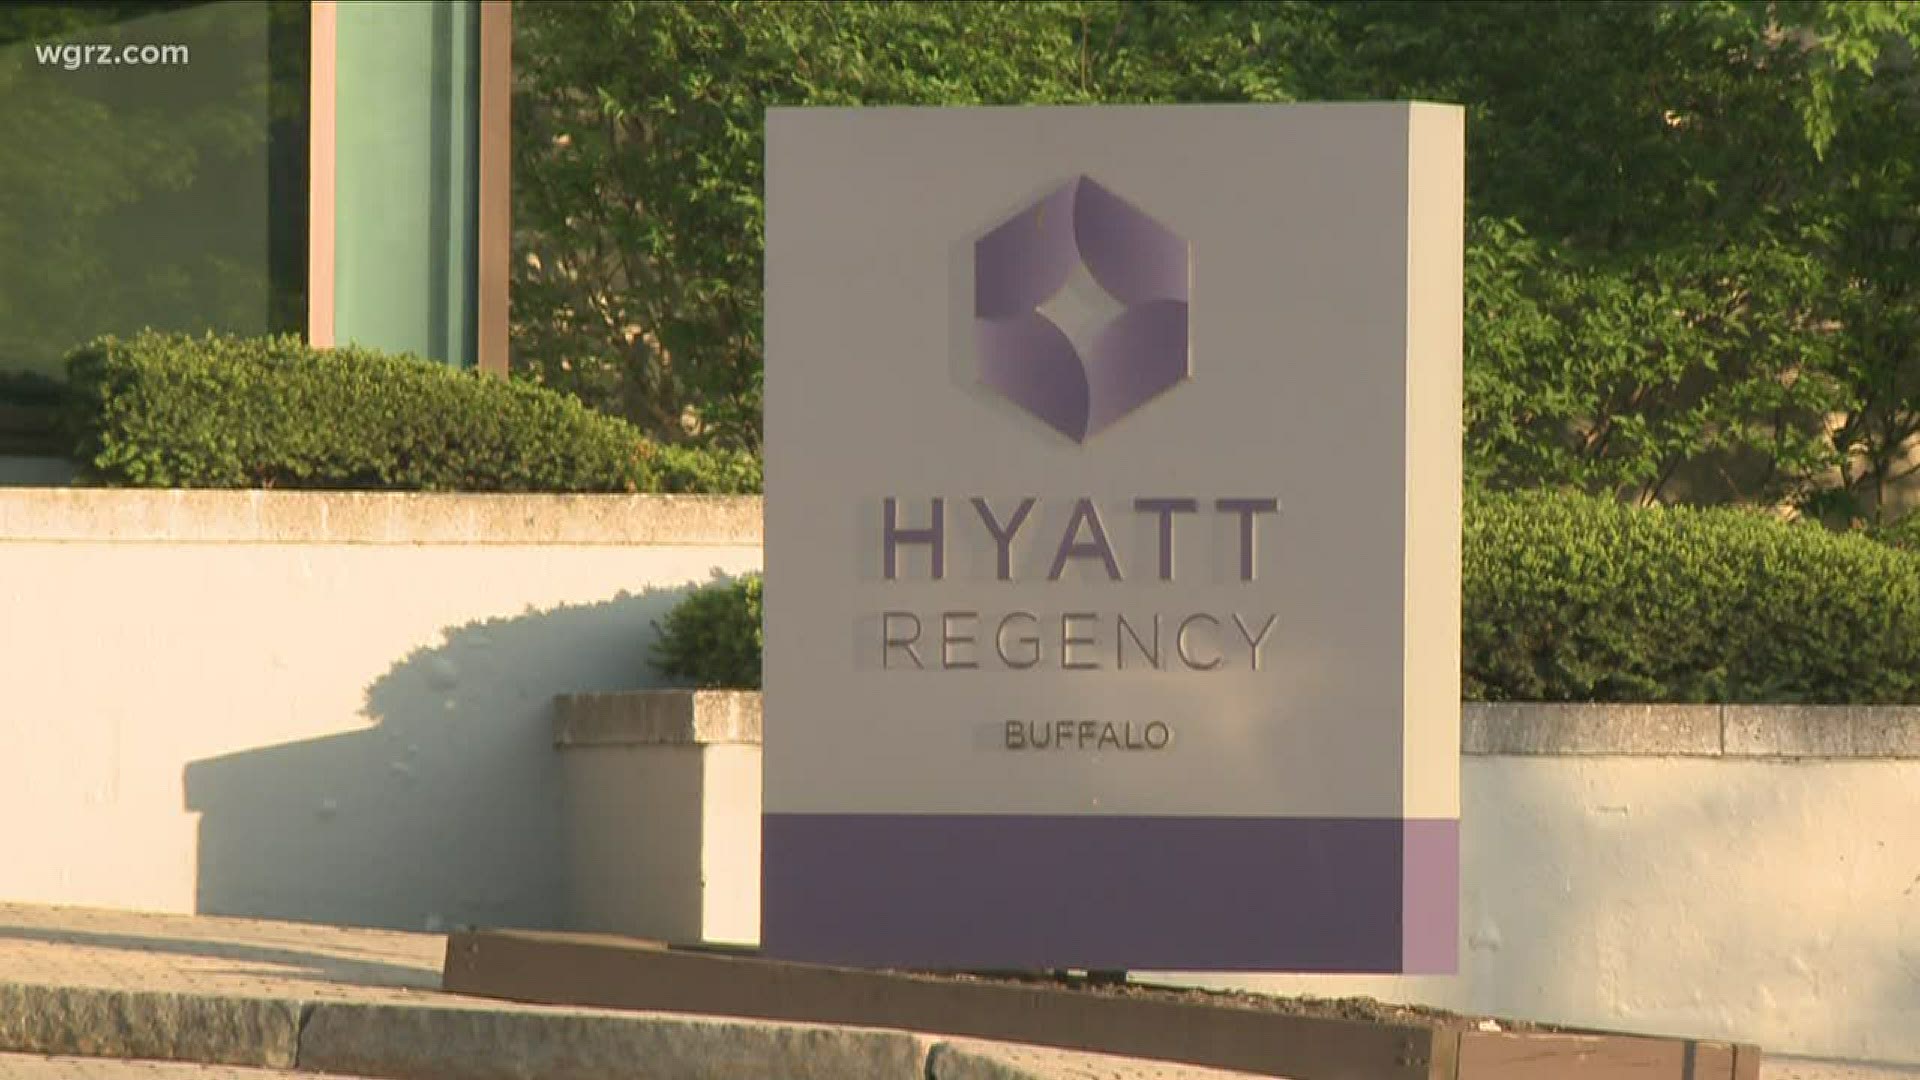 Buffalo Business First is reporting that the Hyatt Hotel brand is pulling out of the Hyatt Regency downtown.